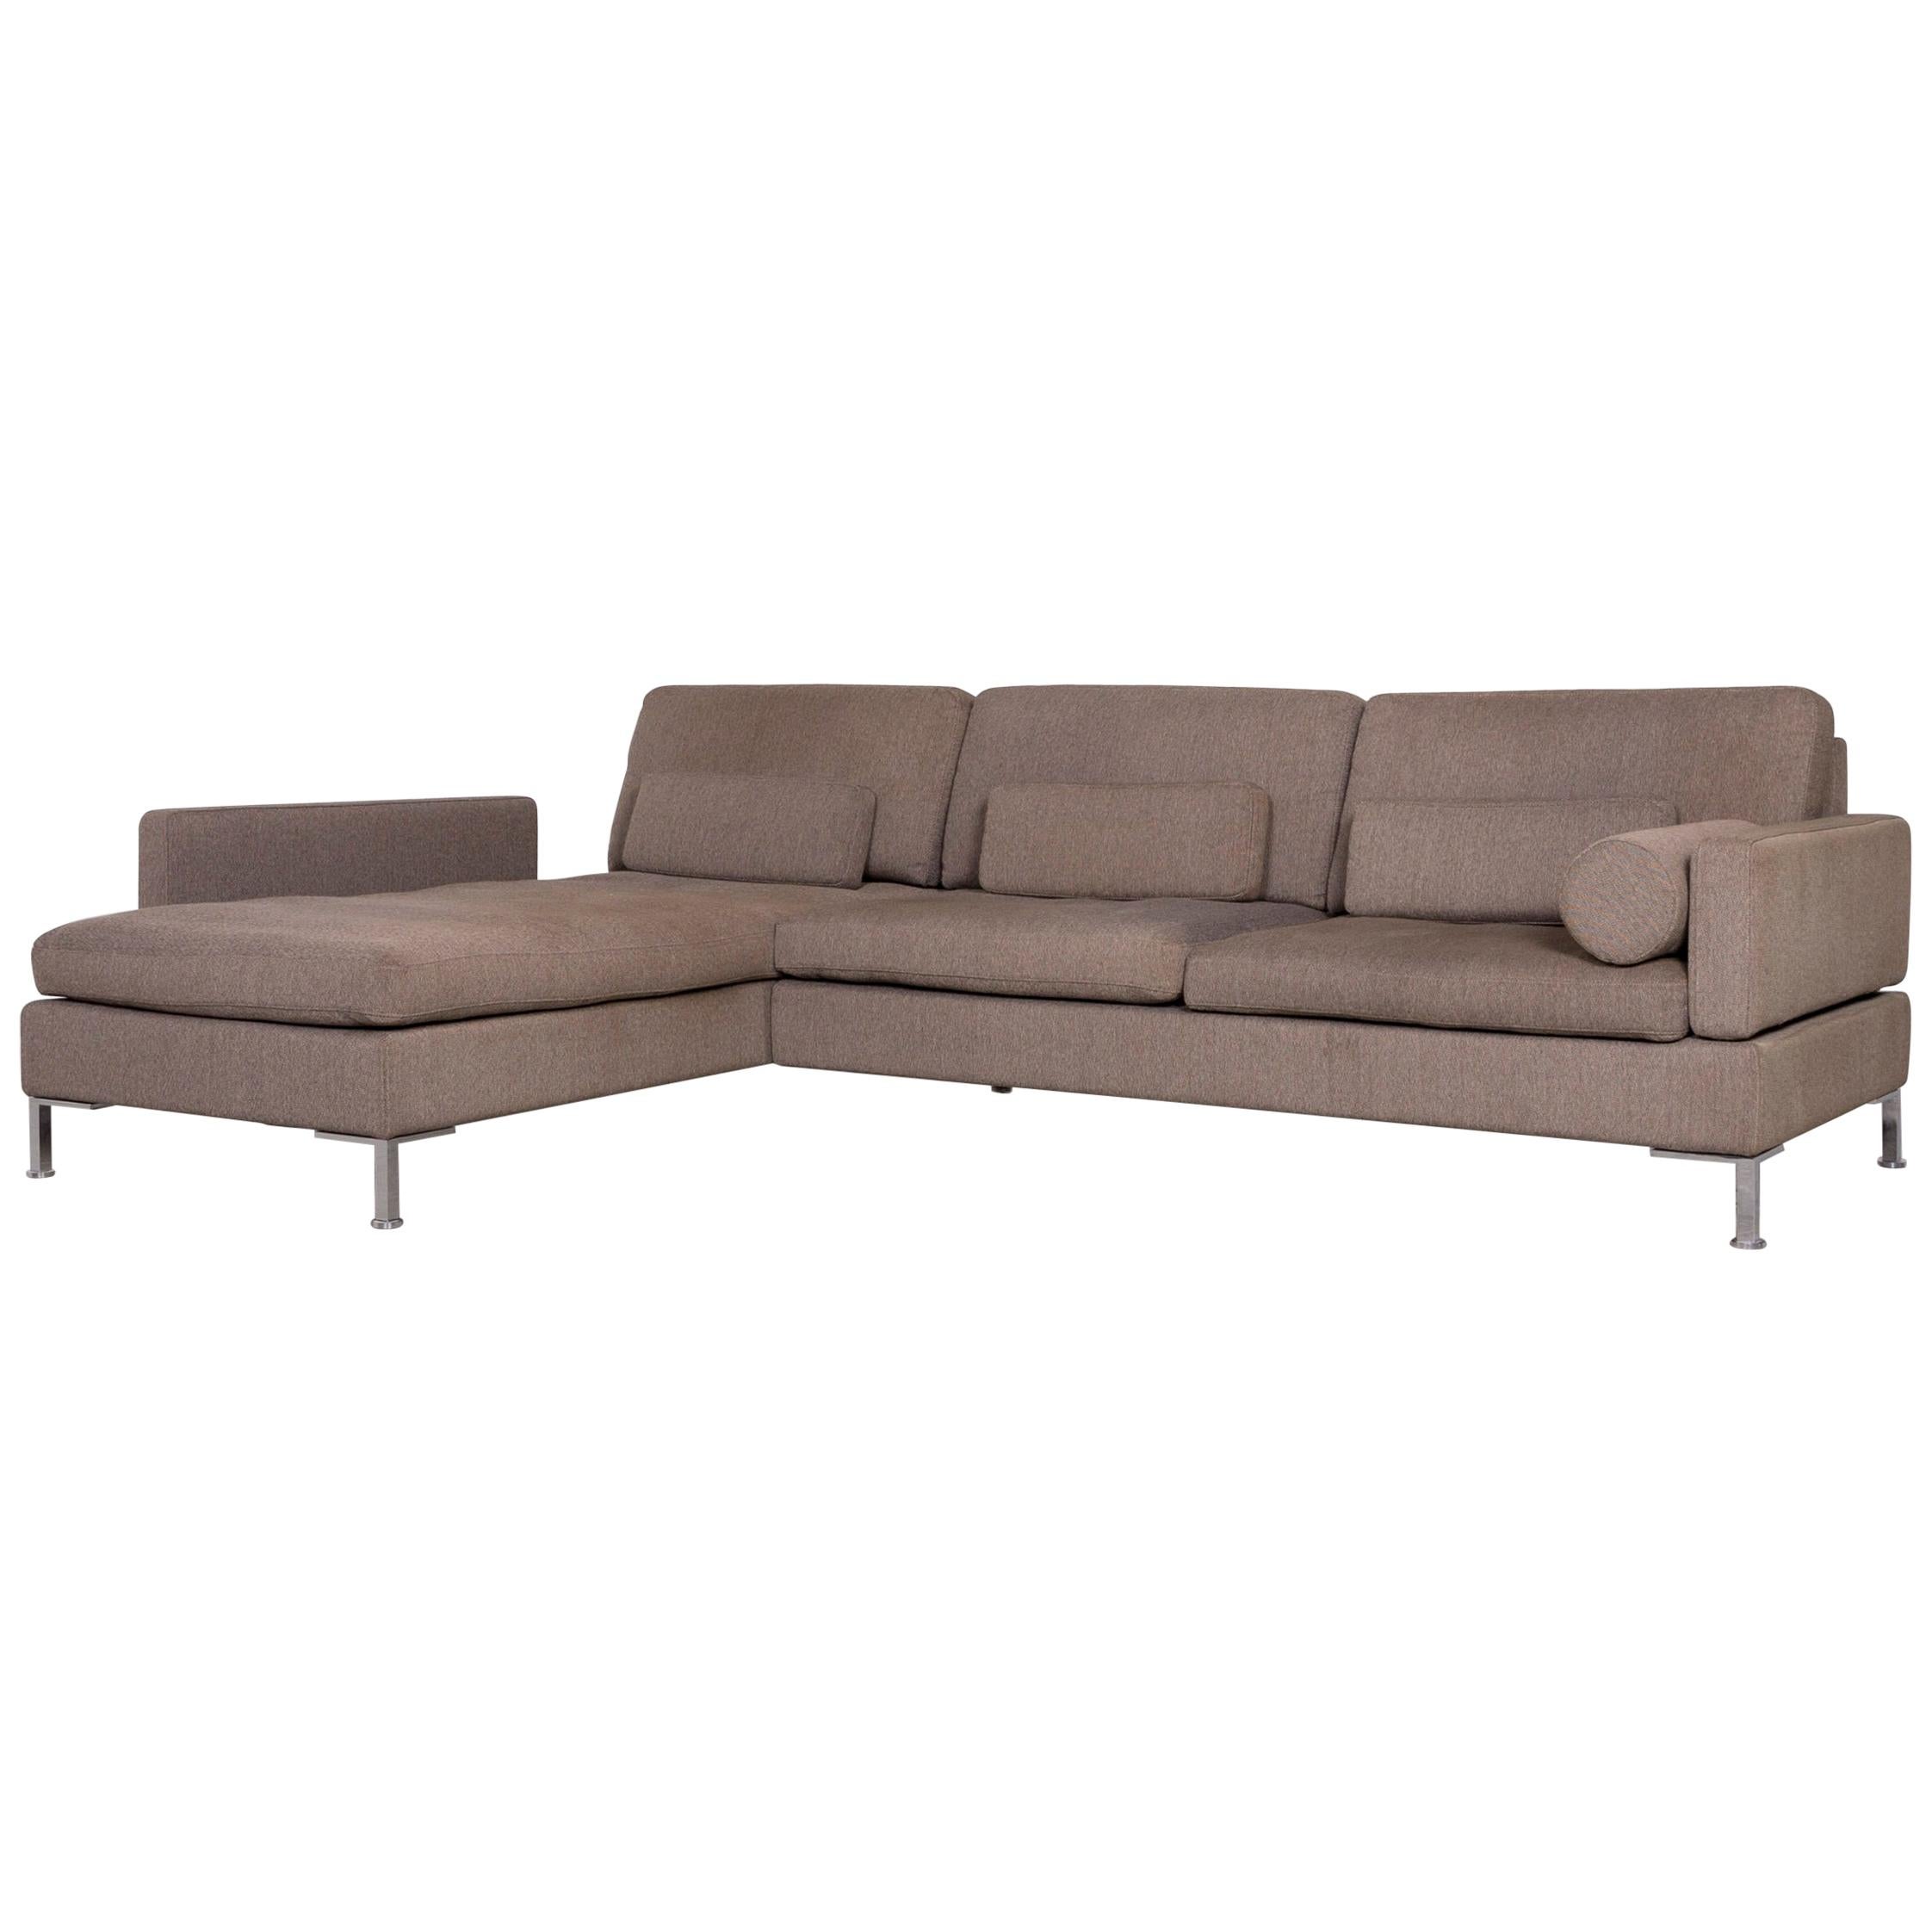 Brühl & Sippold Alba Designer Corner-Sofa Brown Fabric Couch with Function For Sale